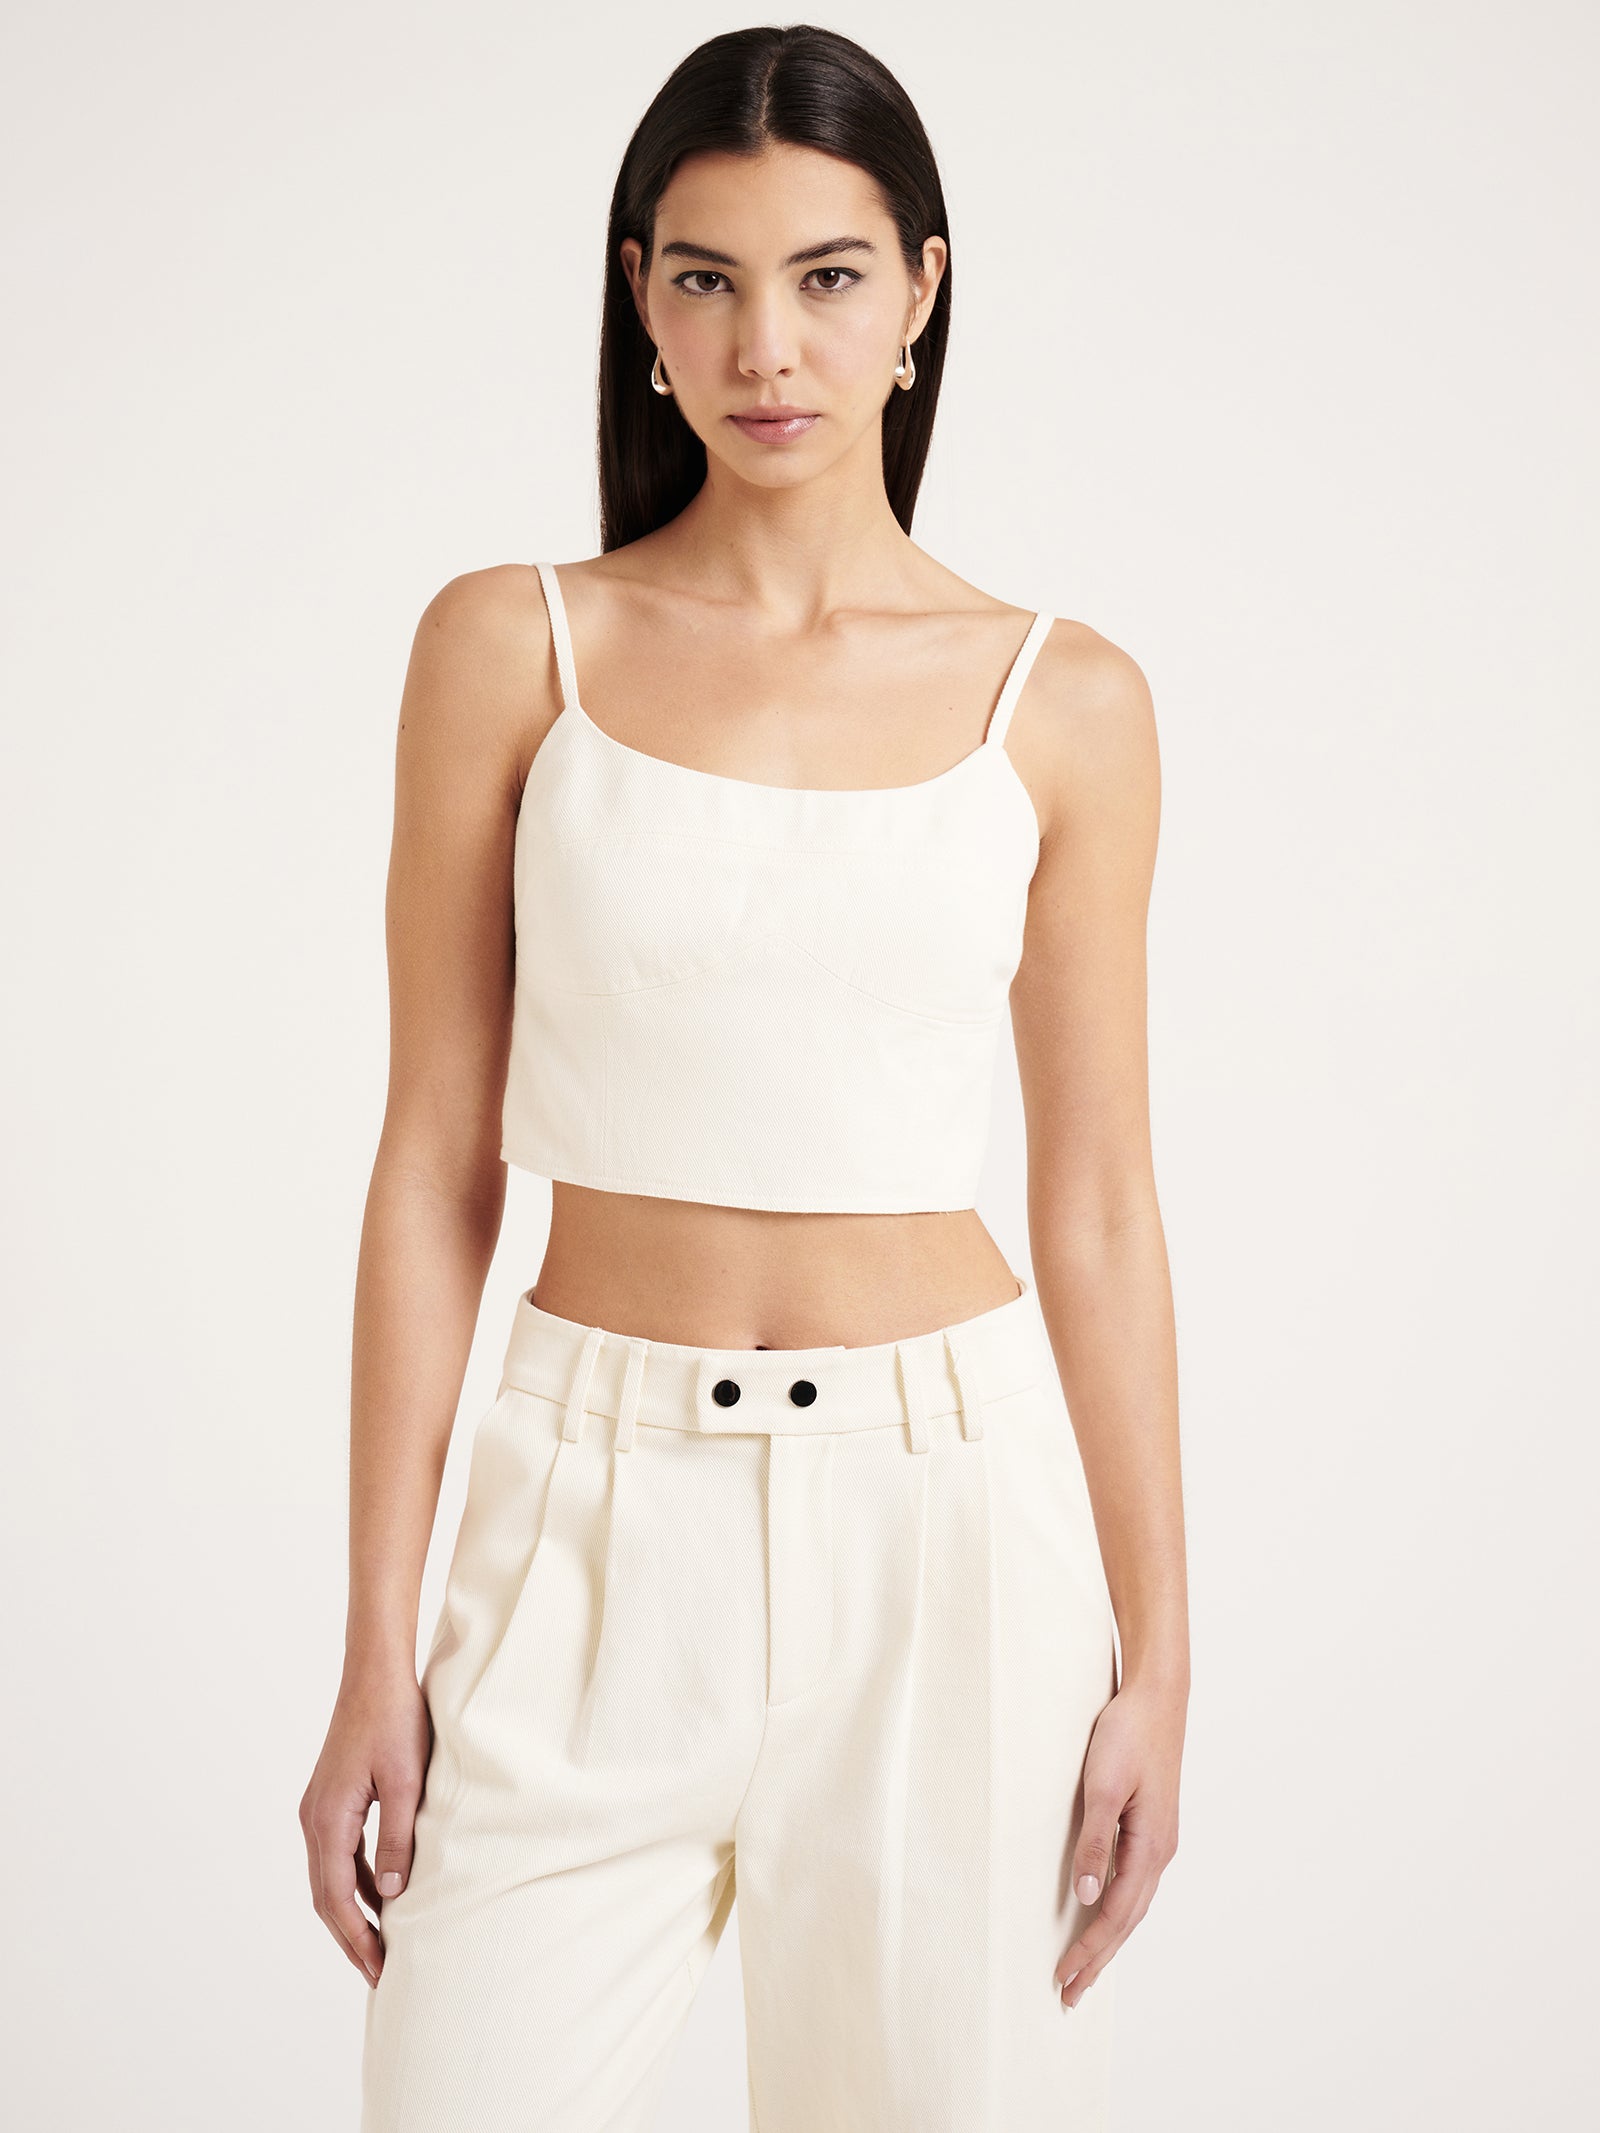 Marni Bustier in Ivory - Glue Store